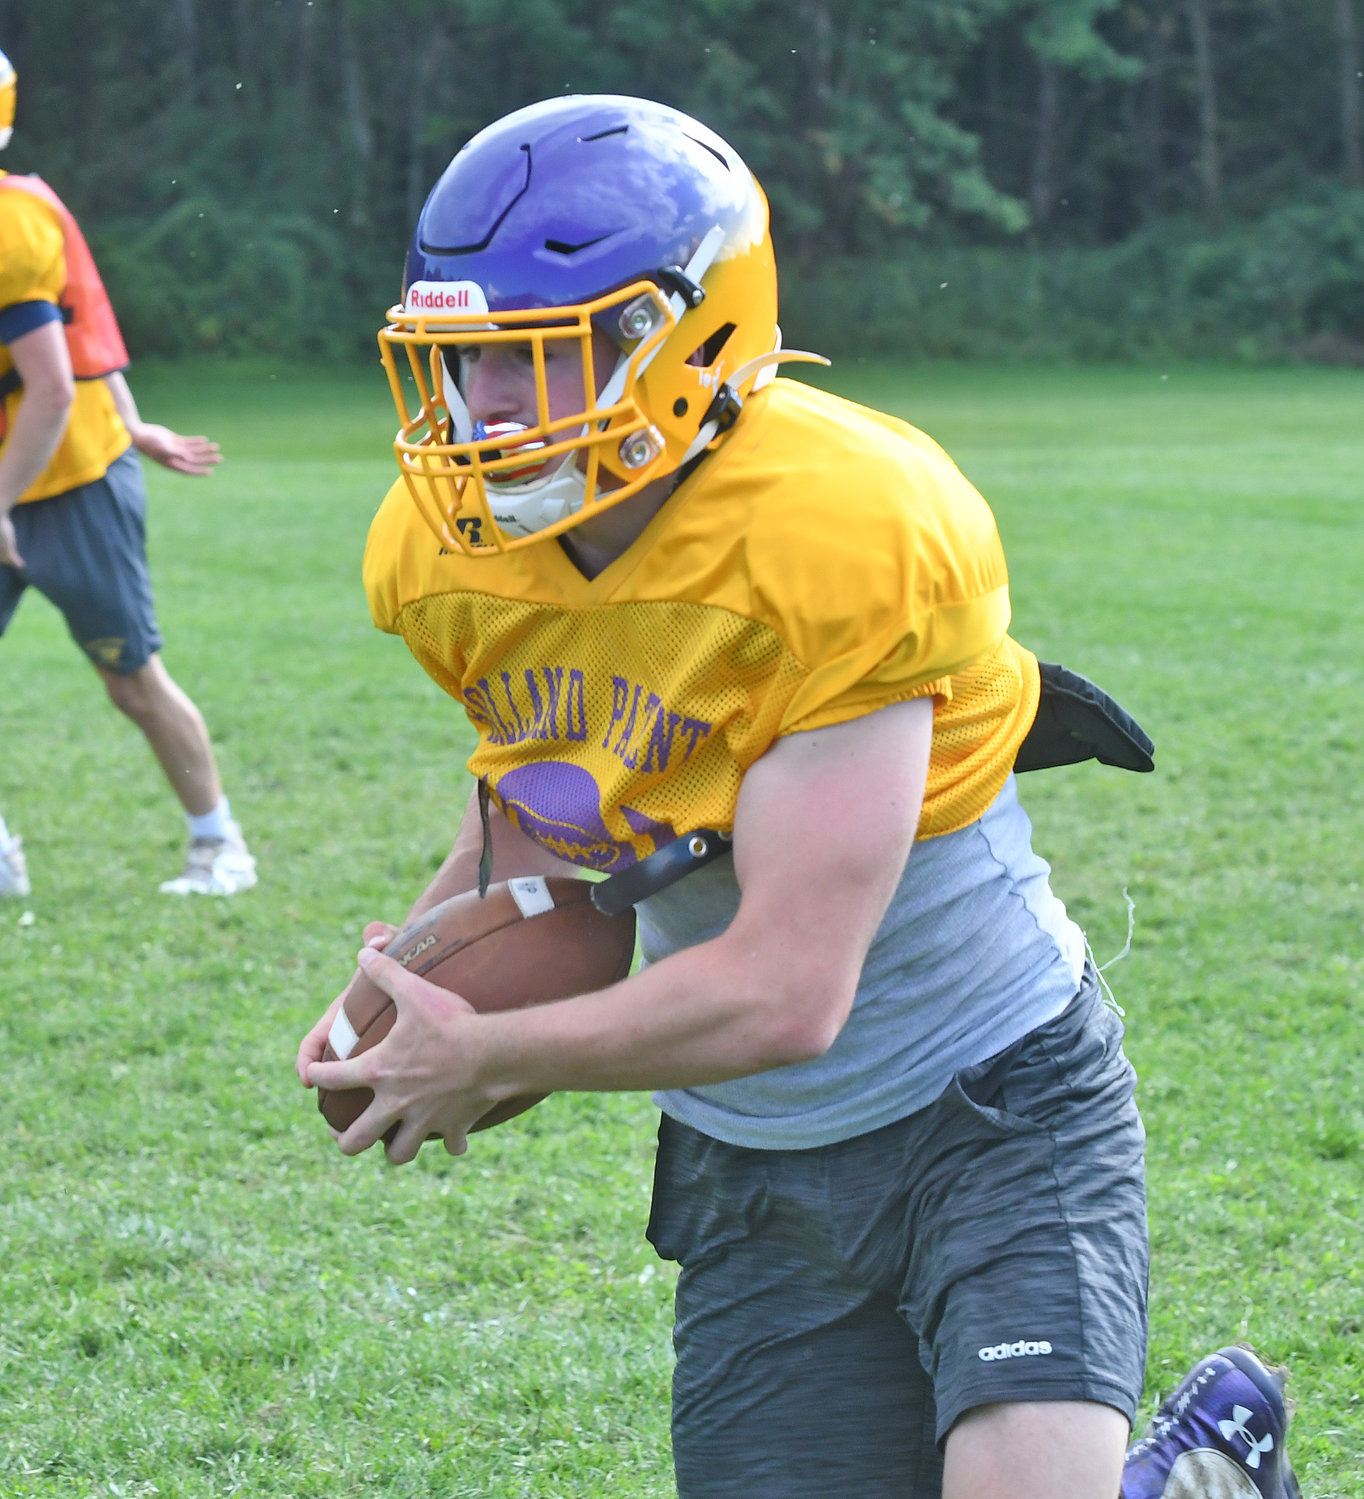 Holland Patent senior running back Jordan Koenig runs after making a catch during practice at the high school in preseason. Koenig is expected to be an impact player on offense and as an inside linebacker on defense.